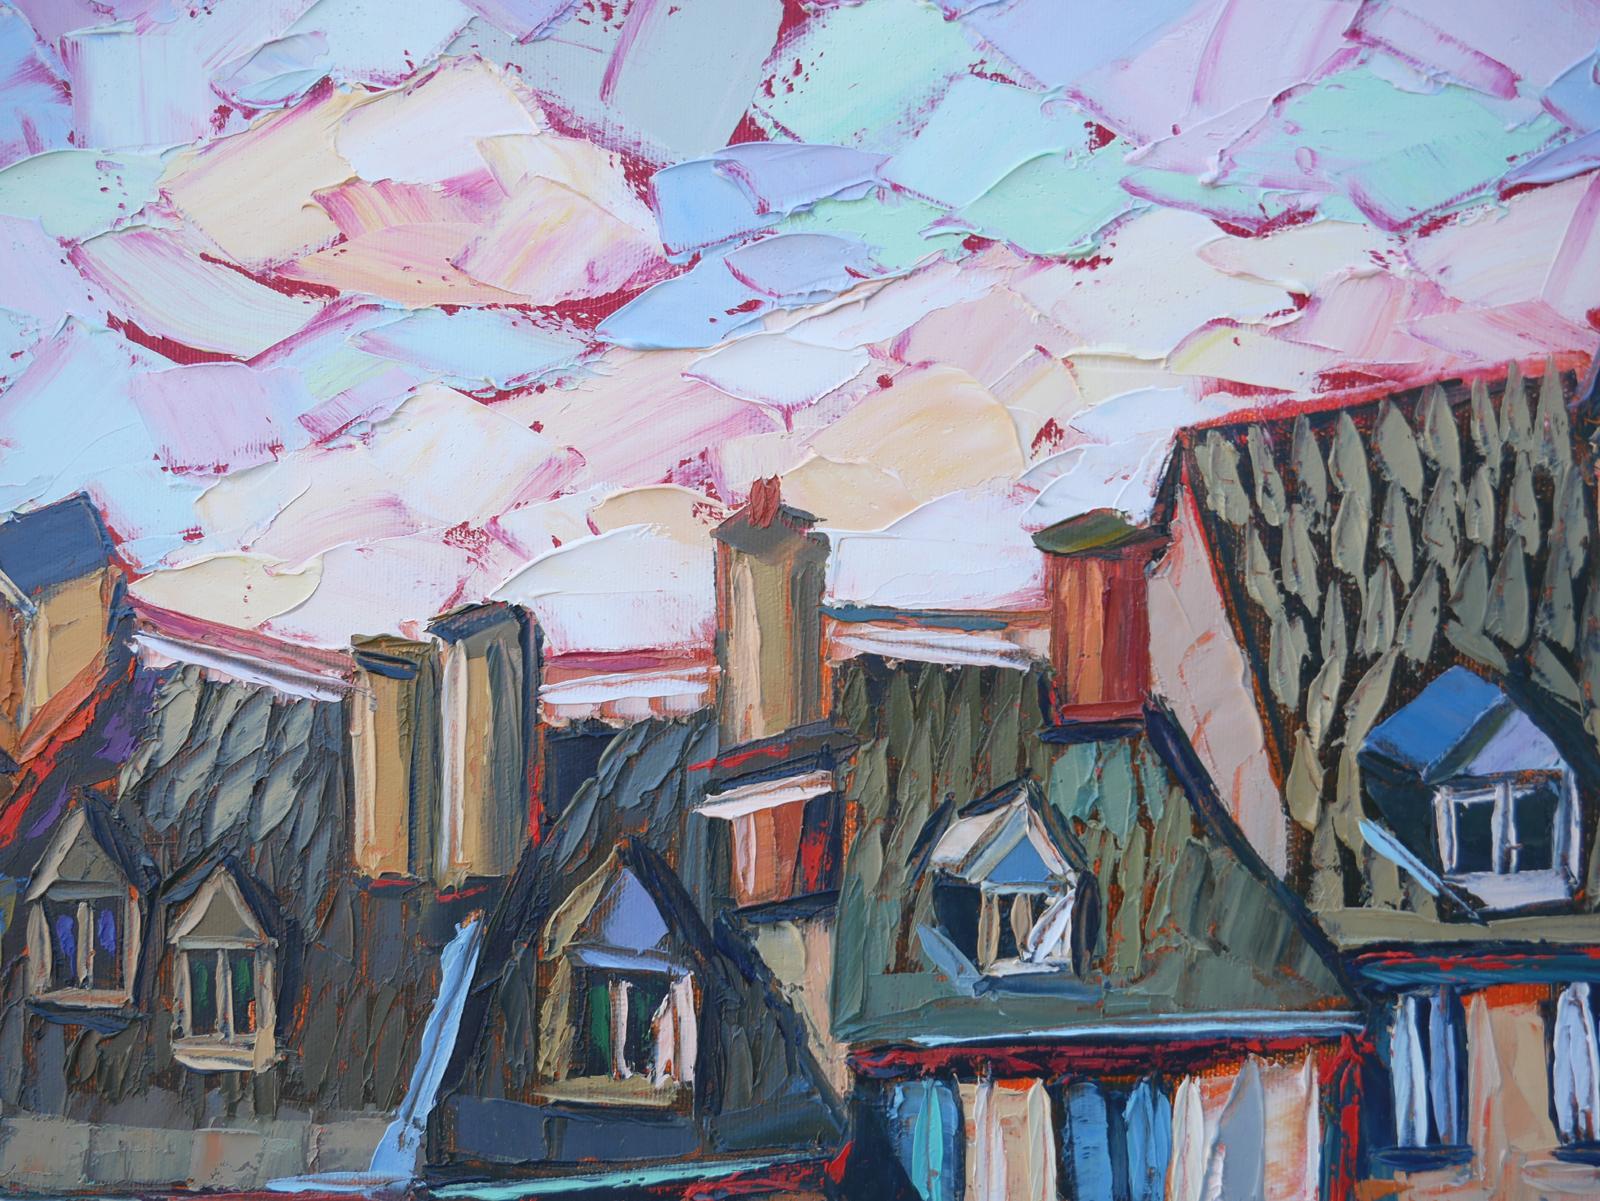 <p>Artist Comments<br />Each small village in the South of France is always charming and full of history. I like to paint the old houses and their uniqueness.</p><p>About the Artist<br />Elizabeth Elkin’s paintings express a love and romanticism for